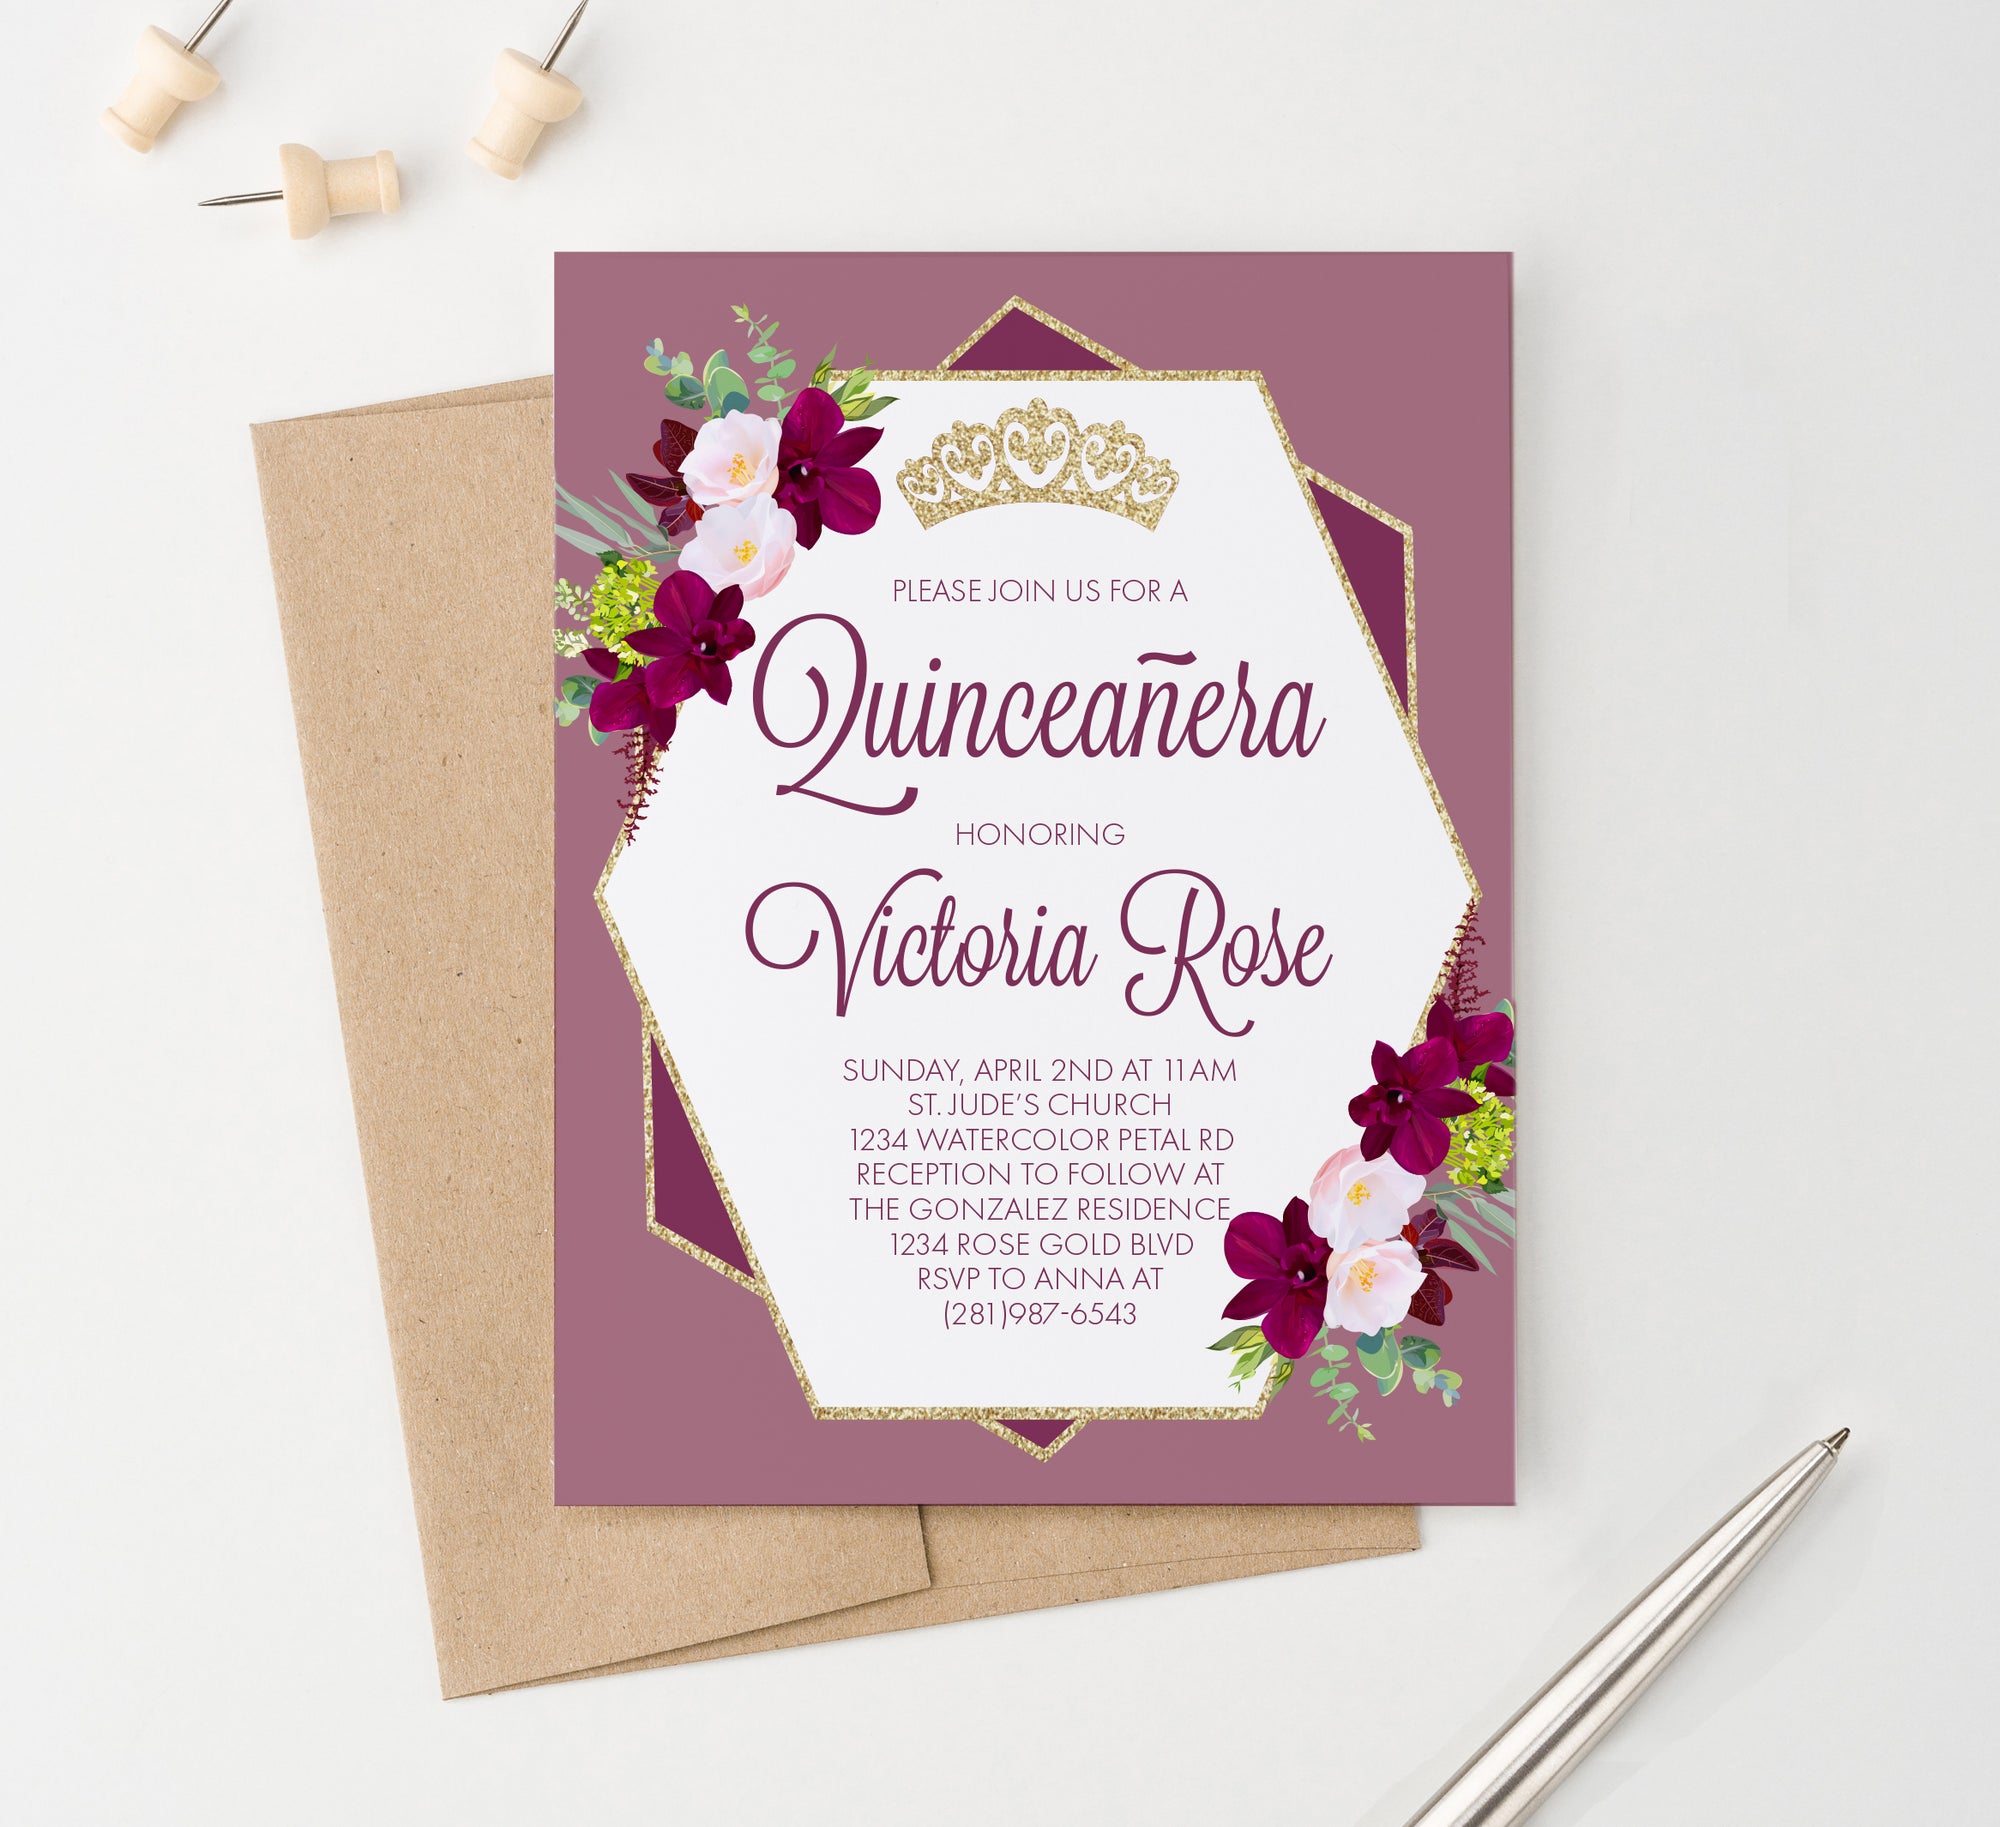 Personalized Burgundy Quinceanera Invitations With Crown And Florals